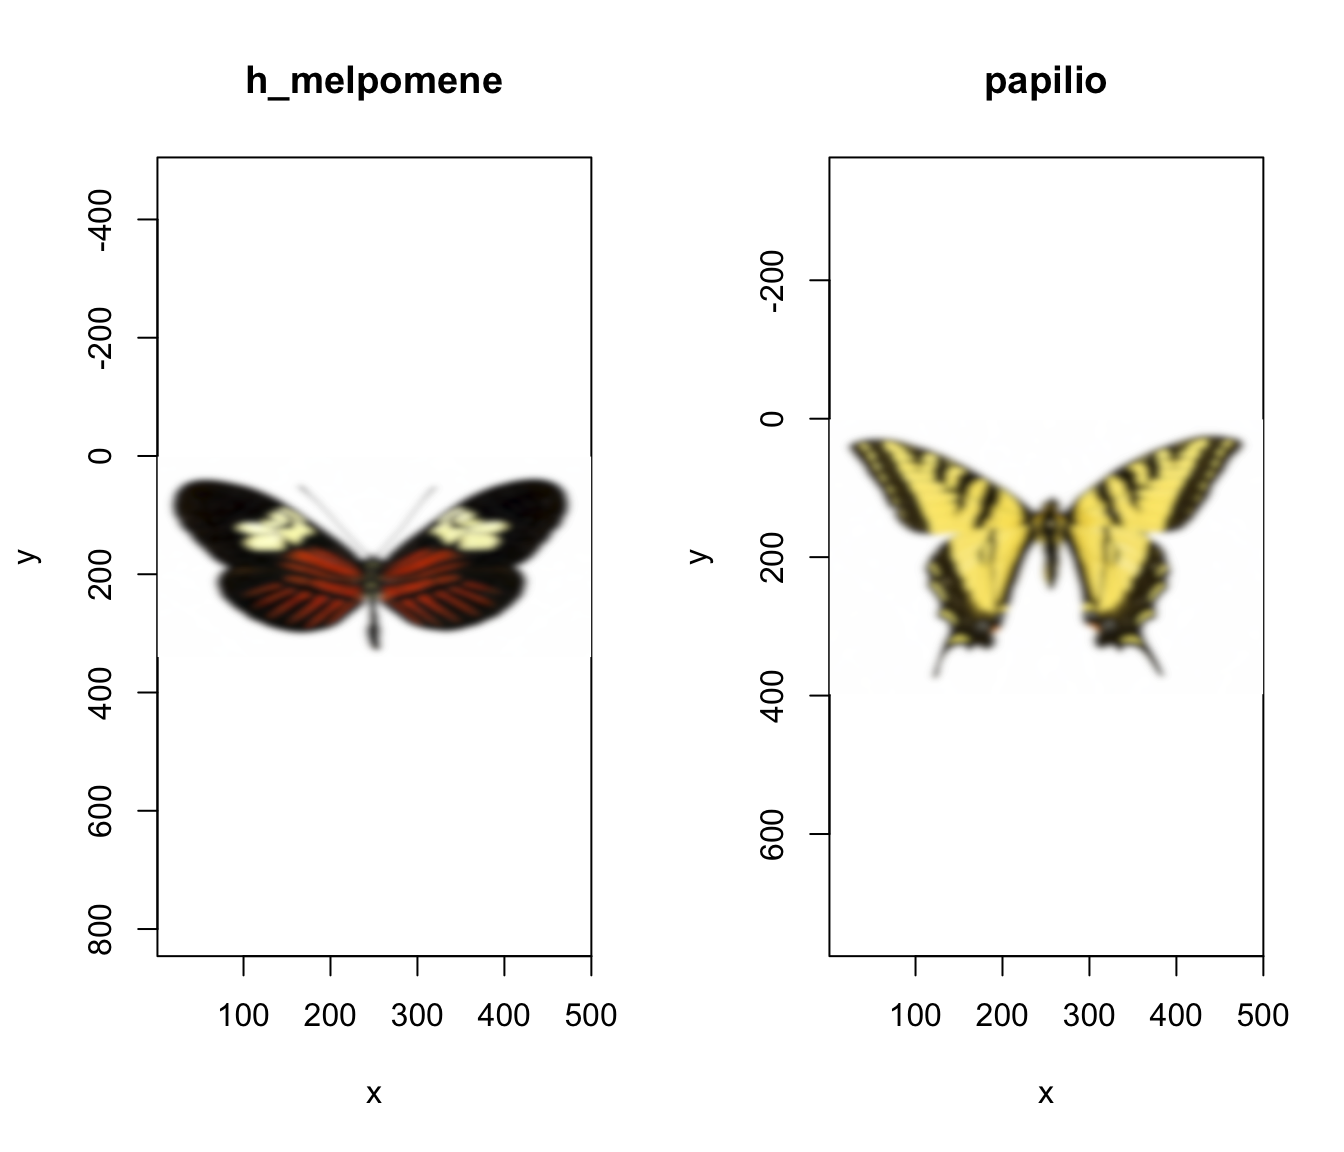 Images of our butterflies after modelling for the acuity of a conspecific viewer